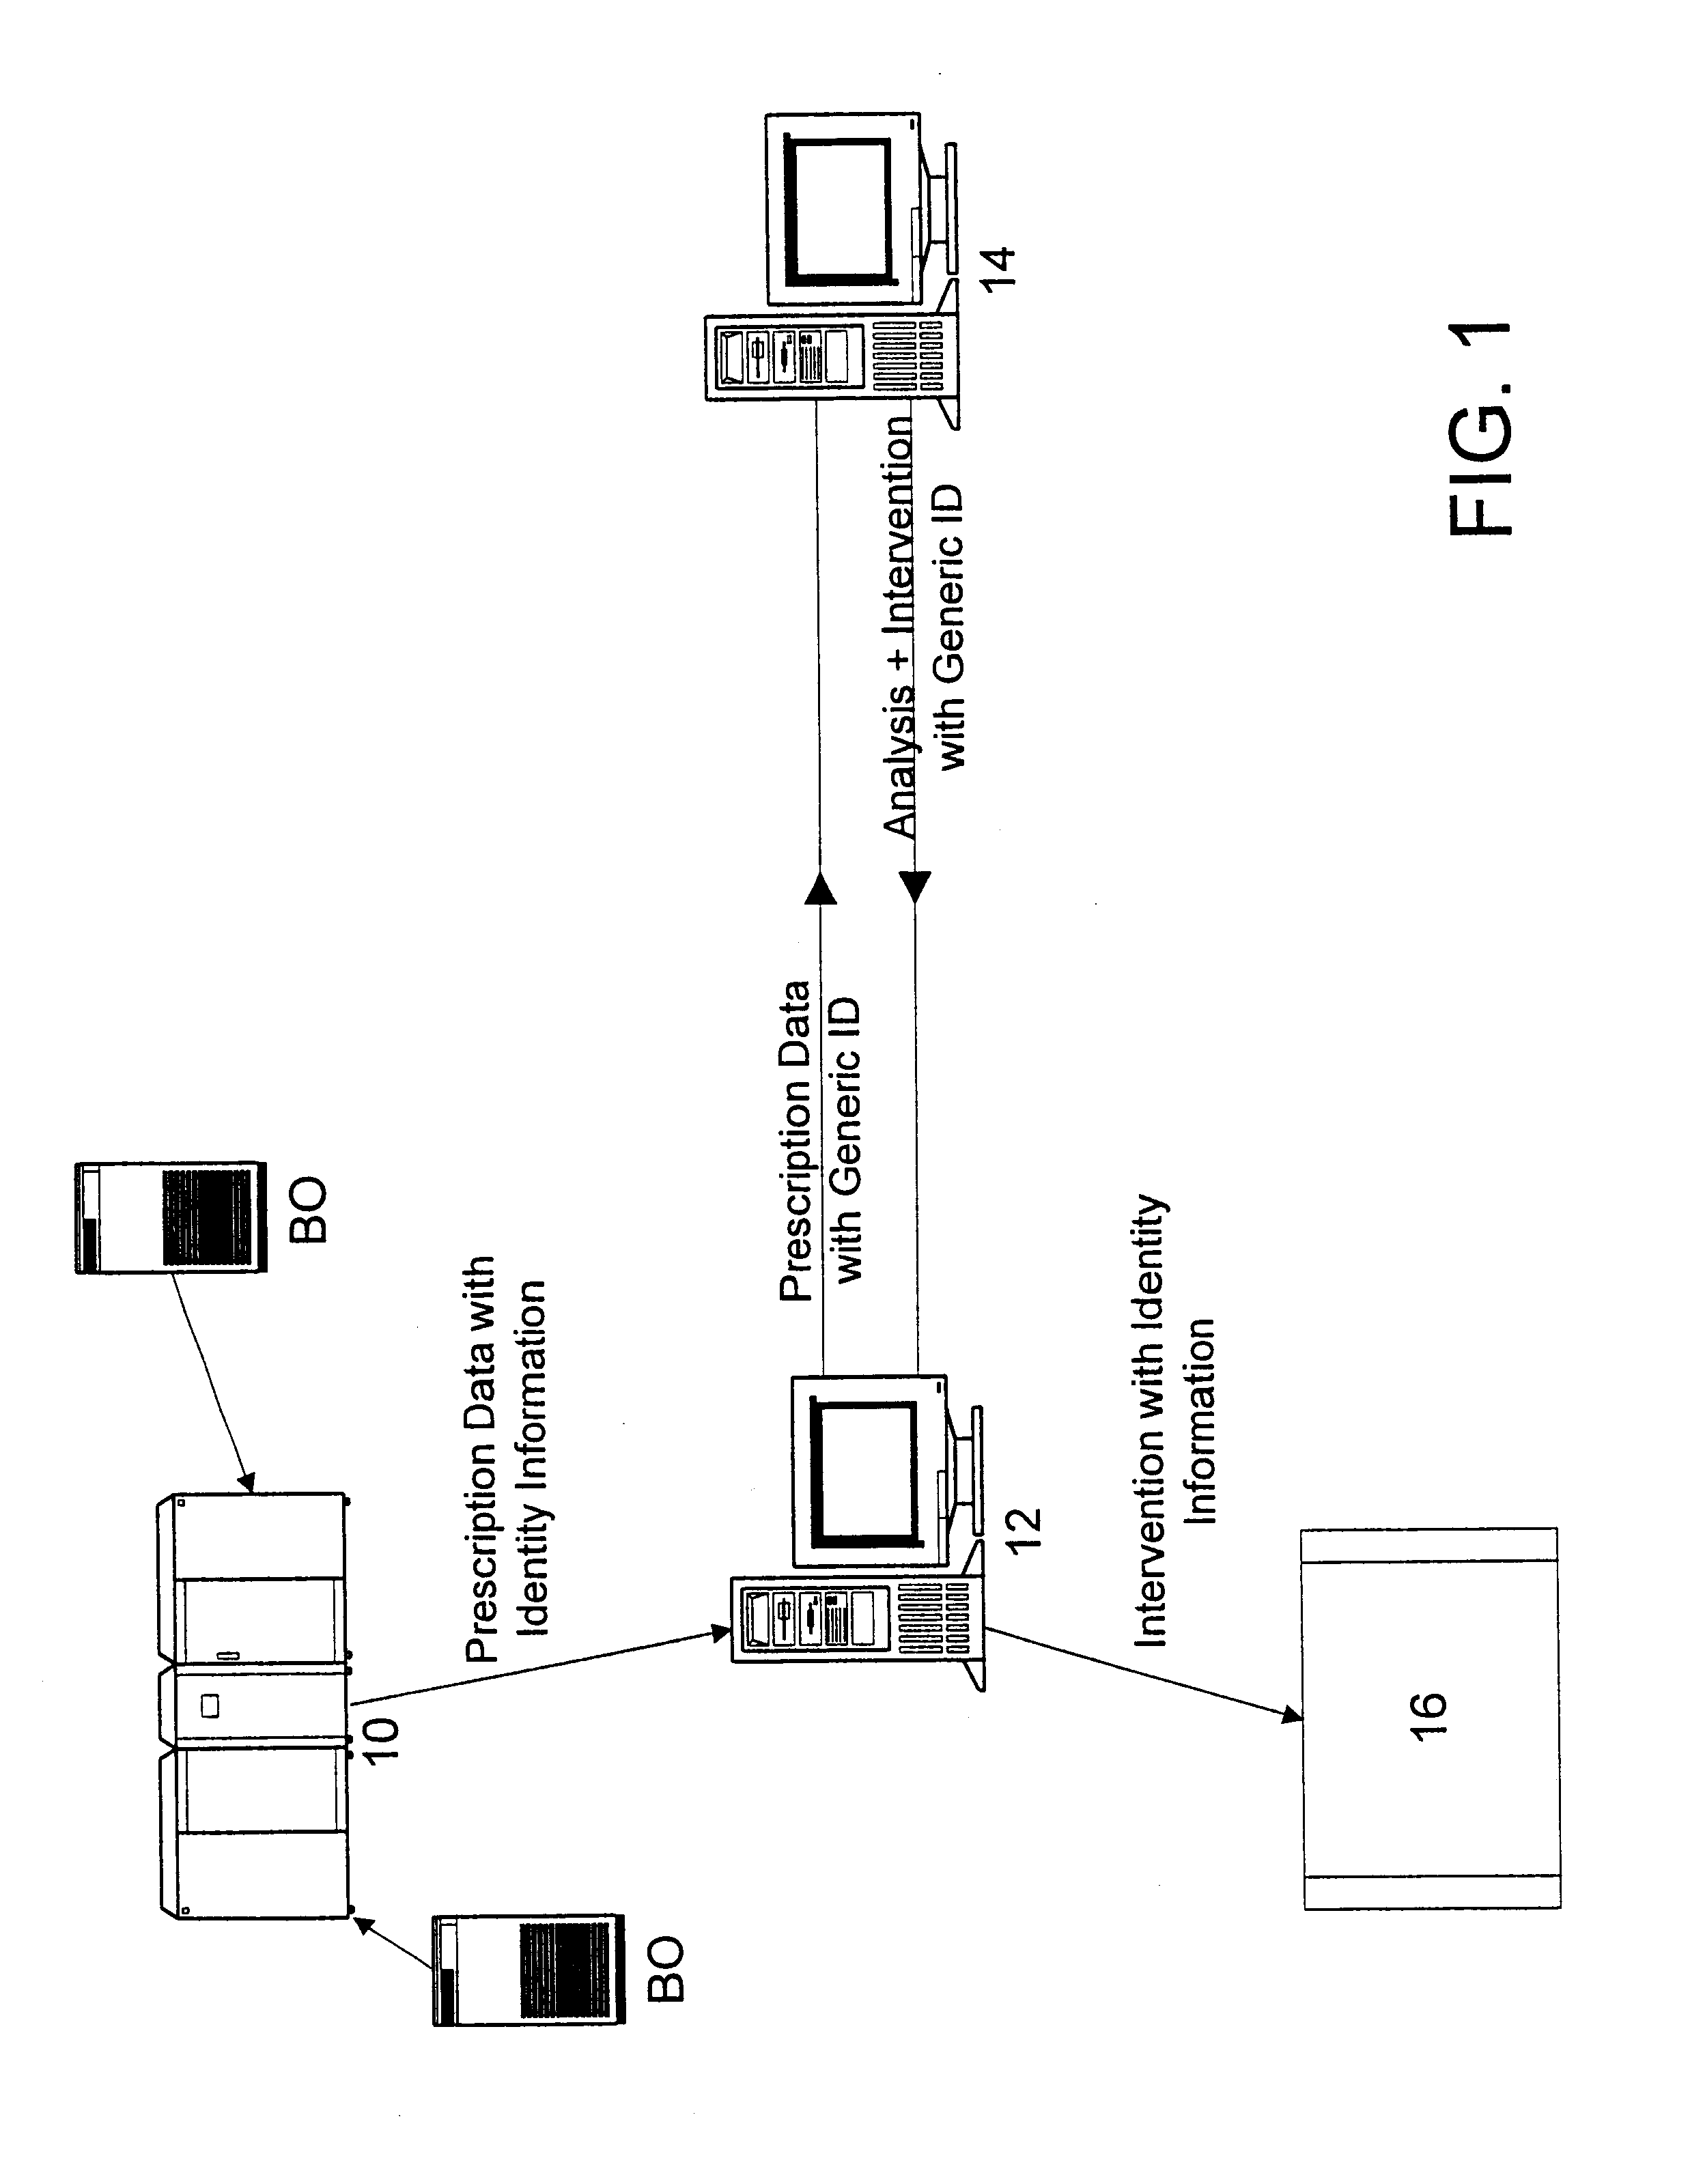 System for processing pharmaceutical data while maintaining patient confidentially